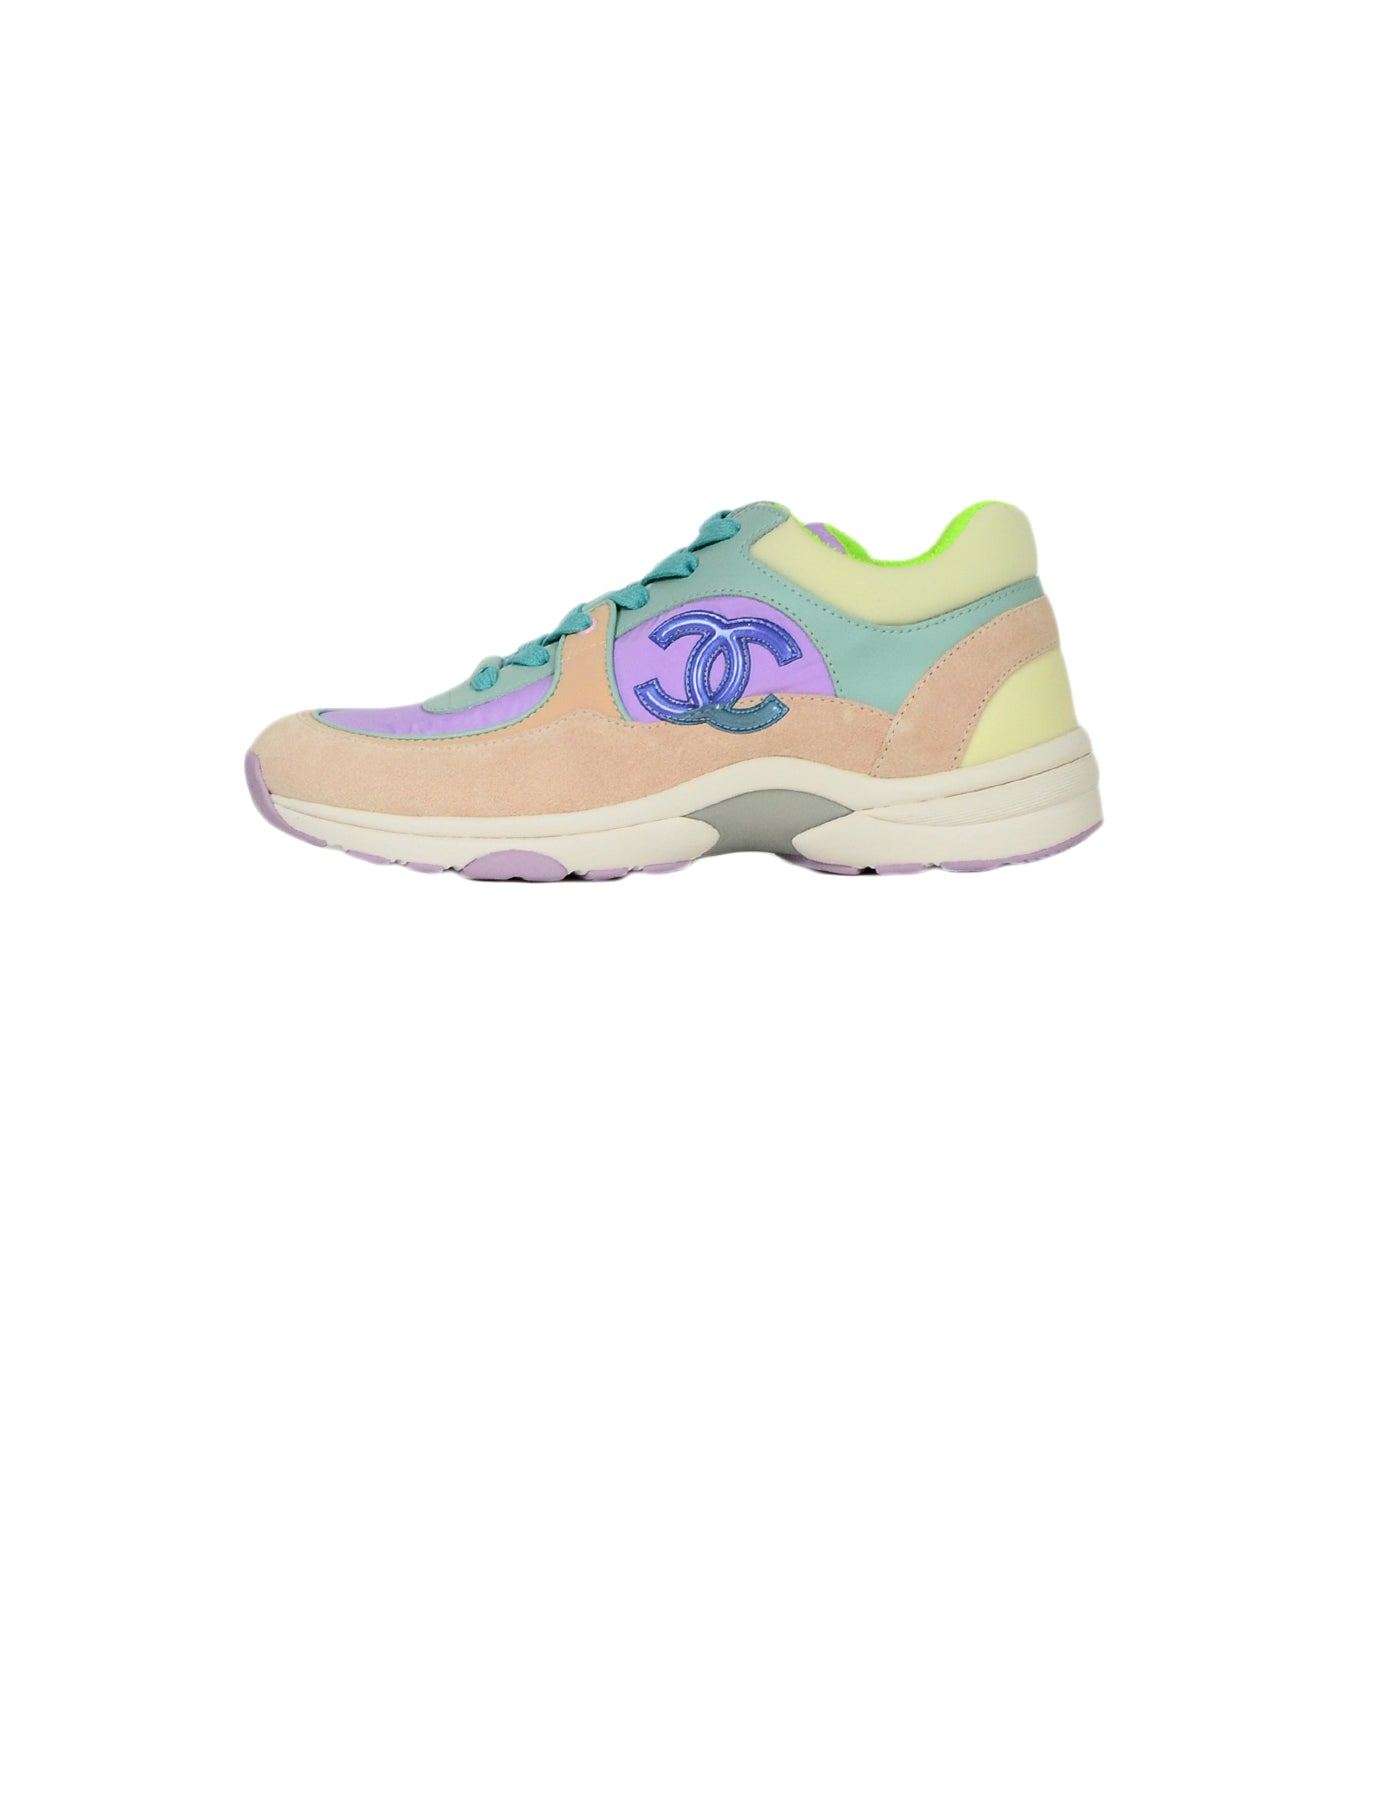 pastel chanel sneakers